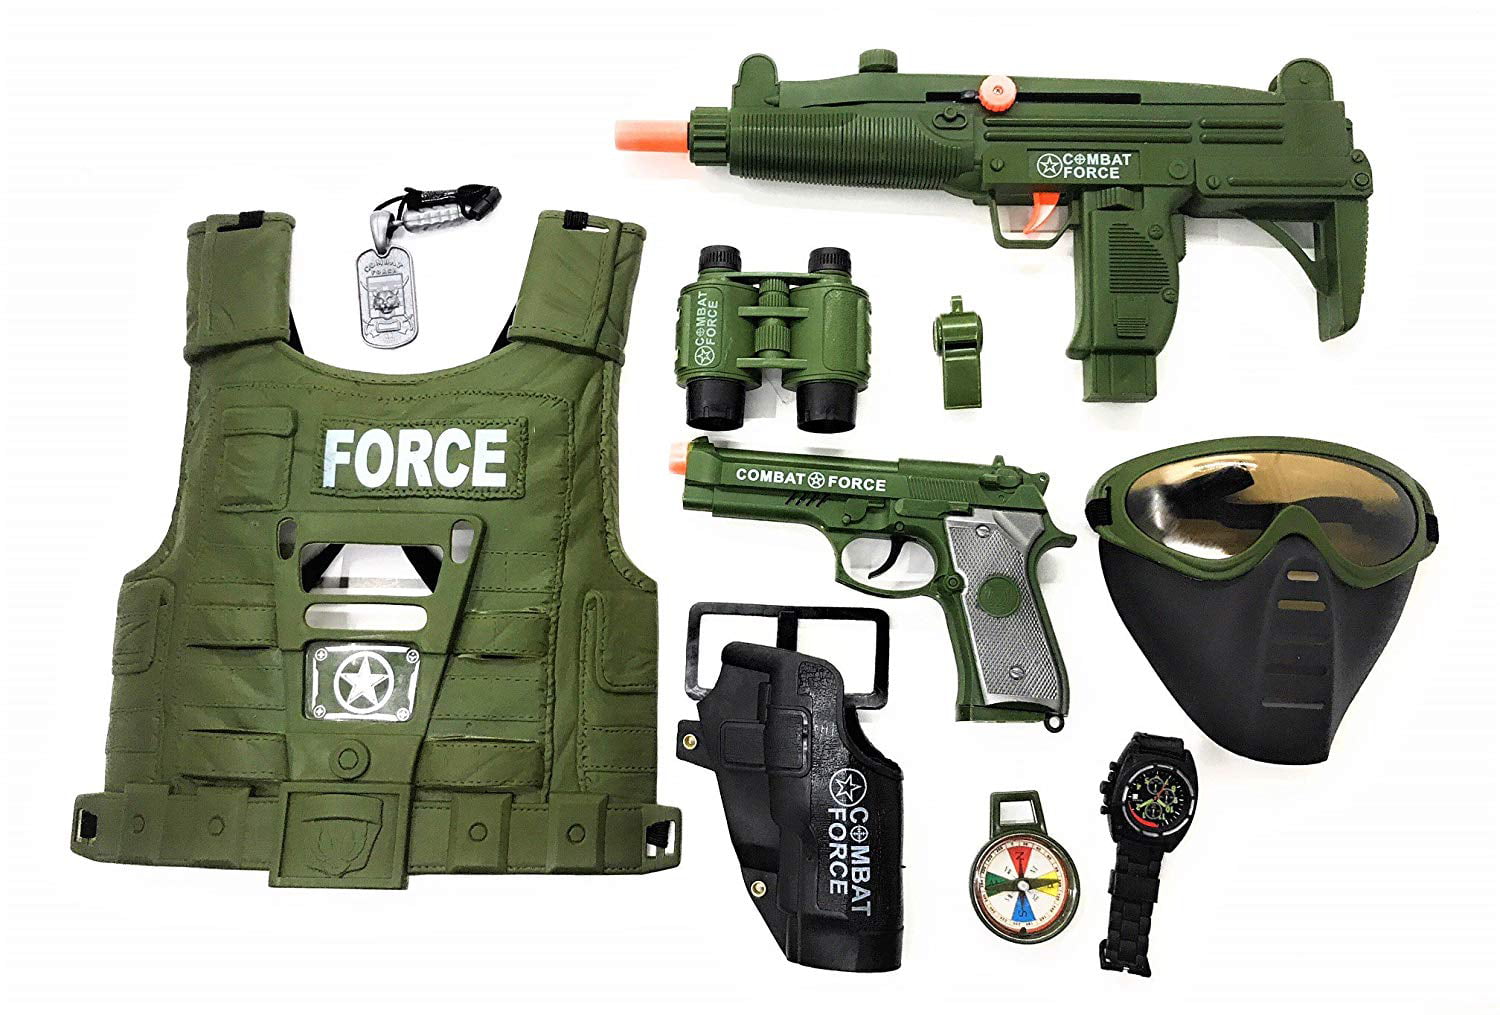 Military Force Combat Role Toy Gun Play Set Kids Toy For Children Christmas Gift